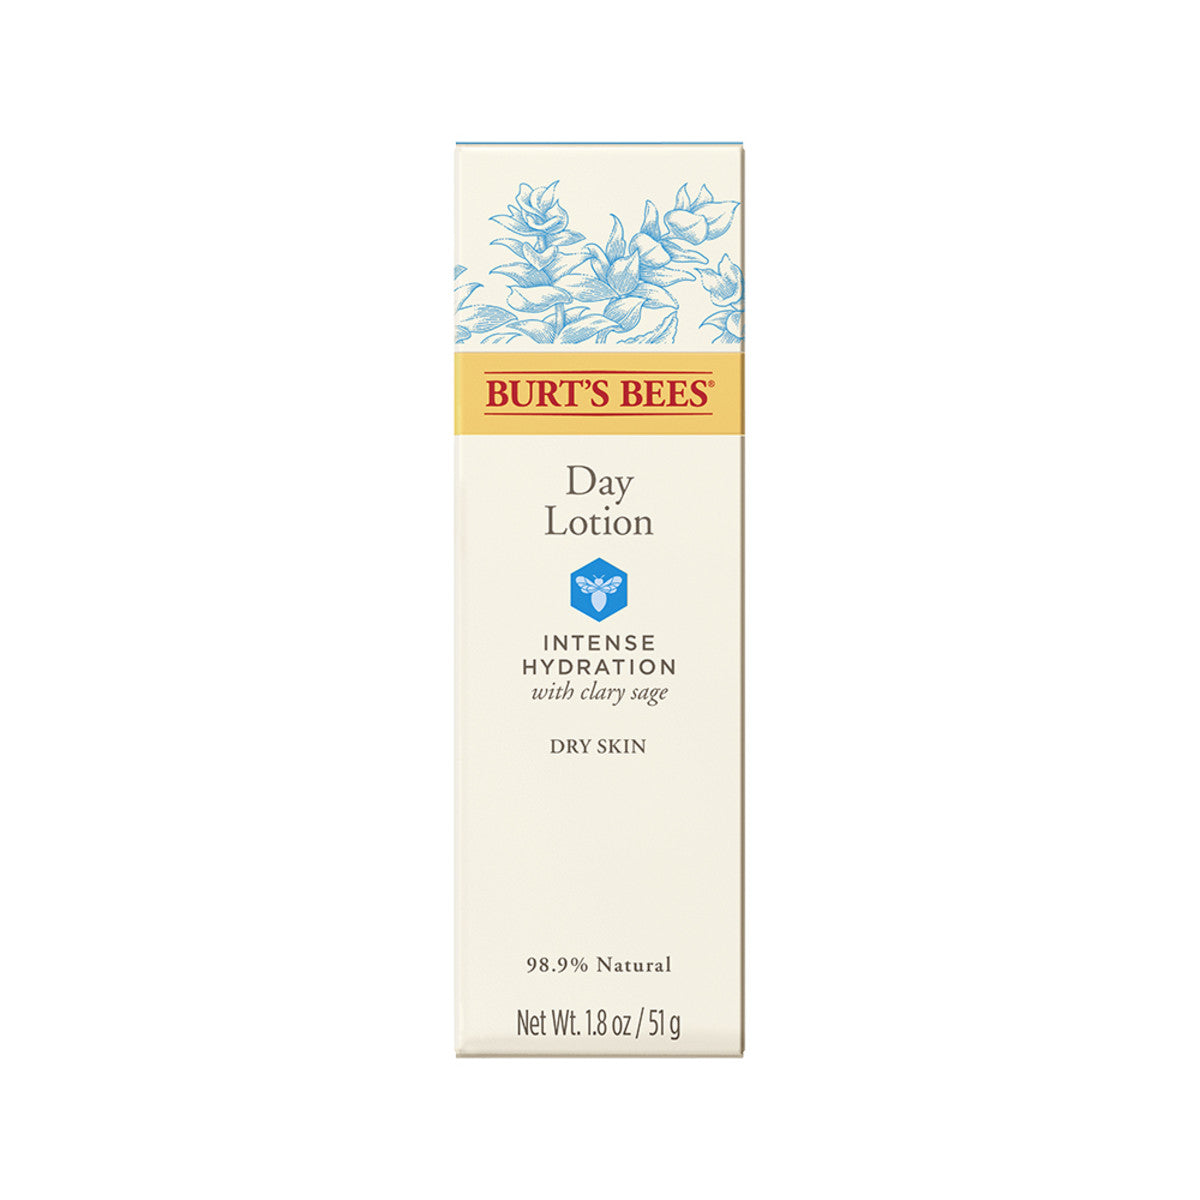 Burts Bees - Intense Hydration Day Lotion Clary Sage